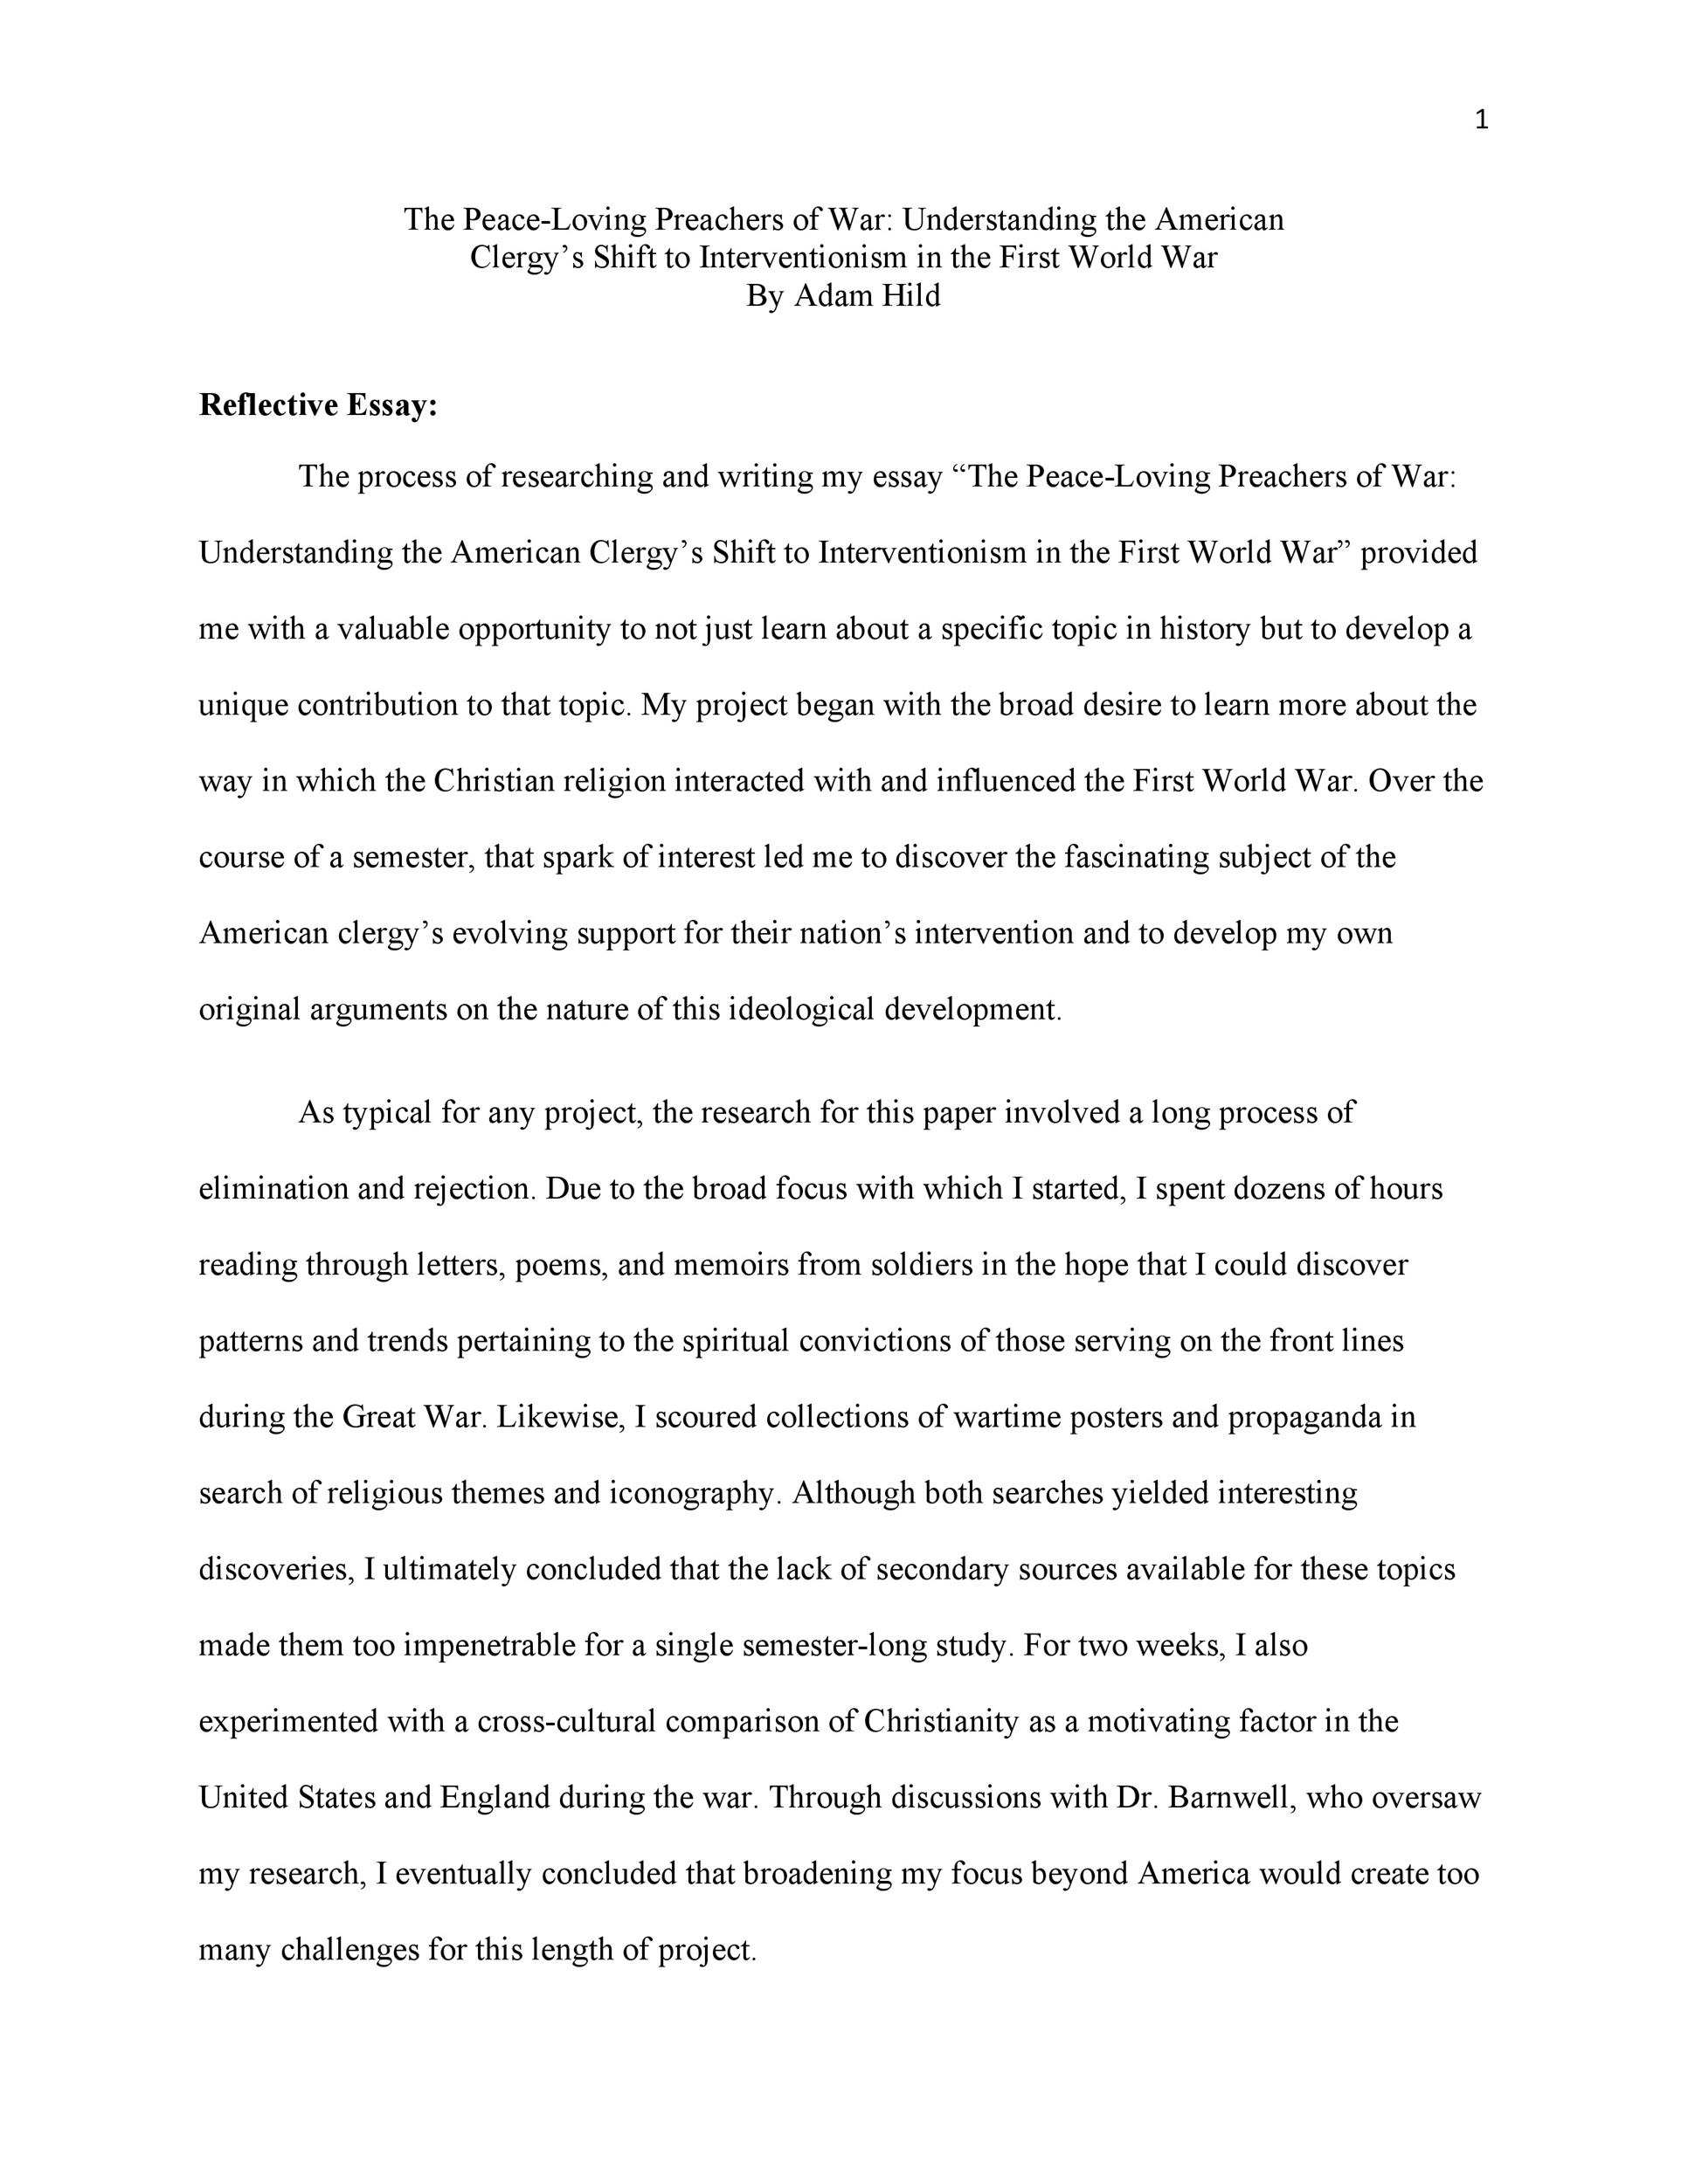 critical reflection paper format